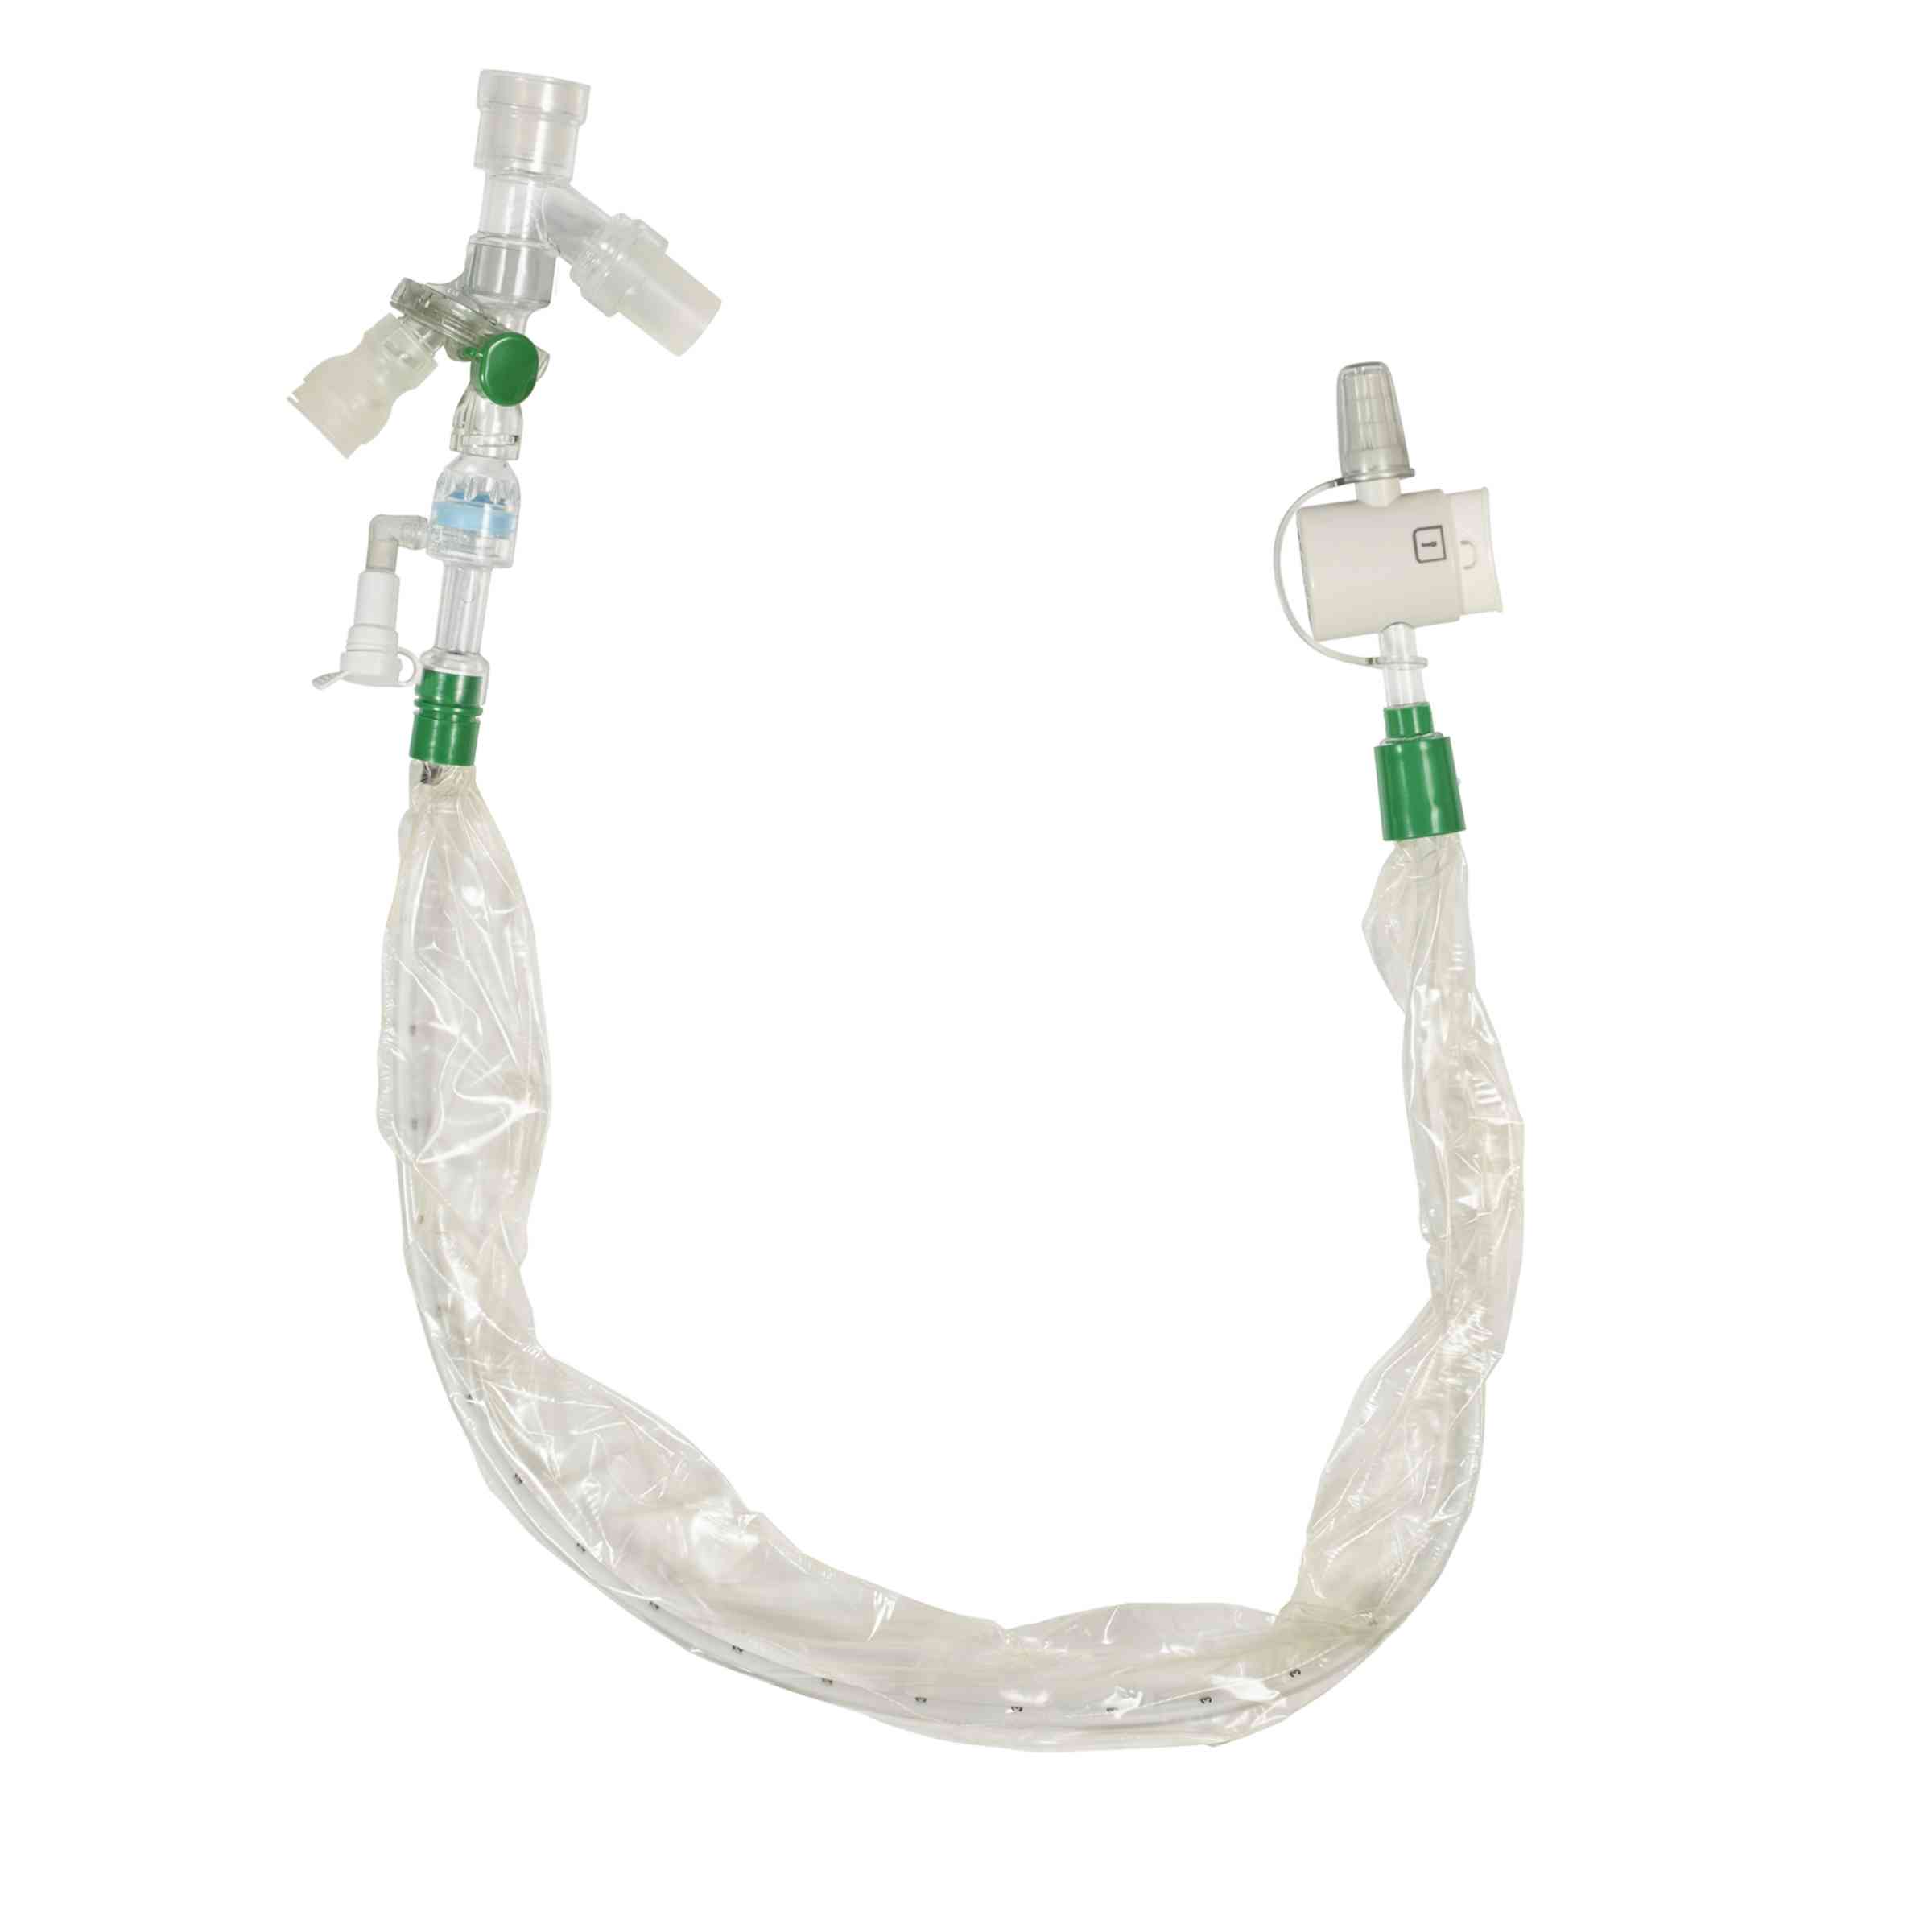 Multi-Access Port Replacement Catheter for Adults 12F (Tracheostom